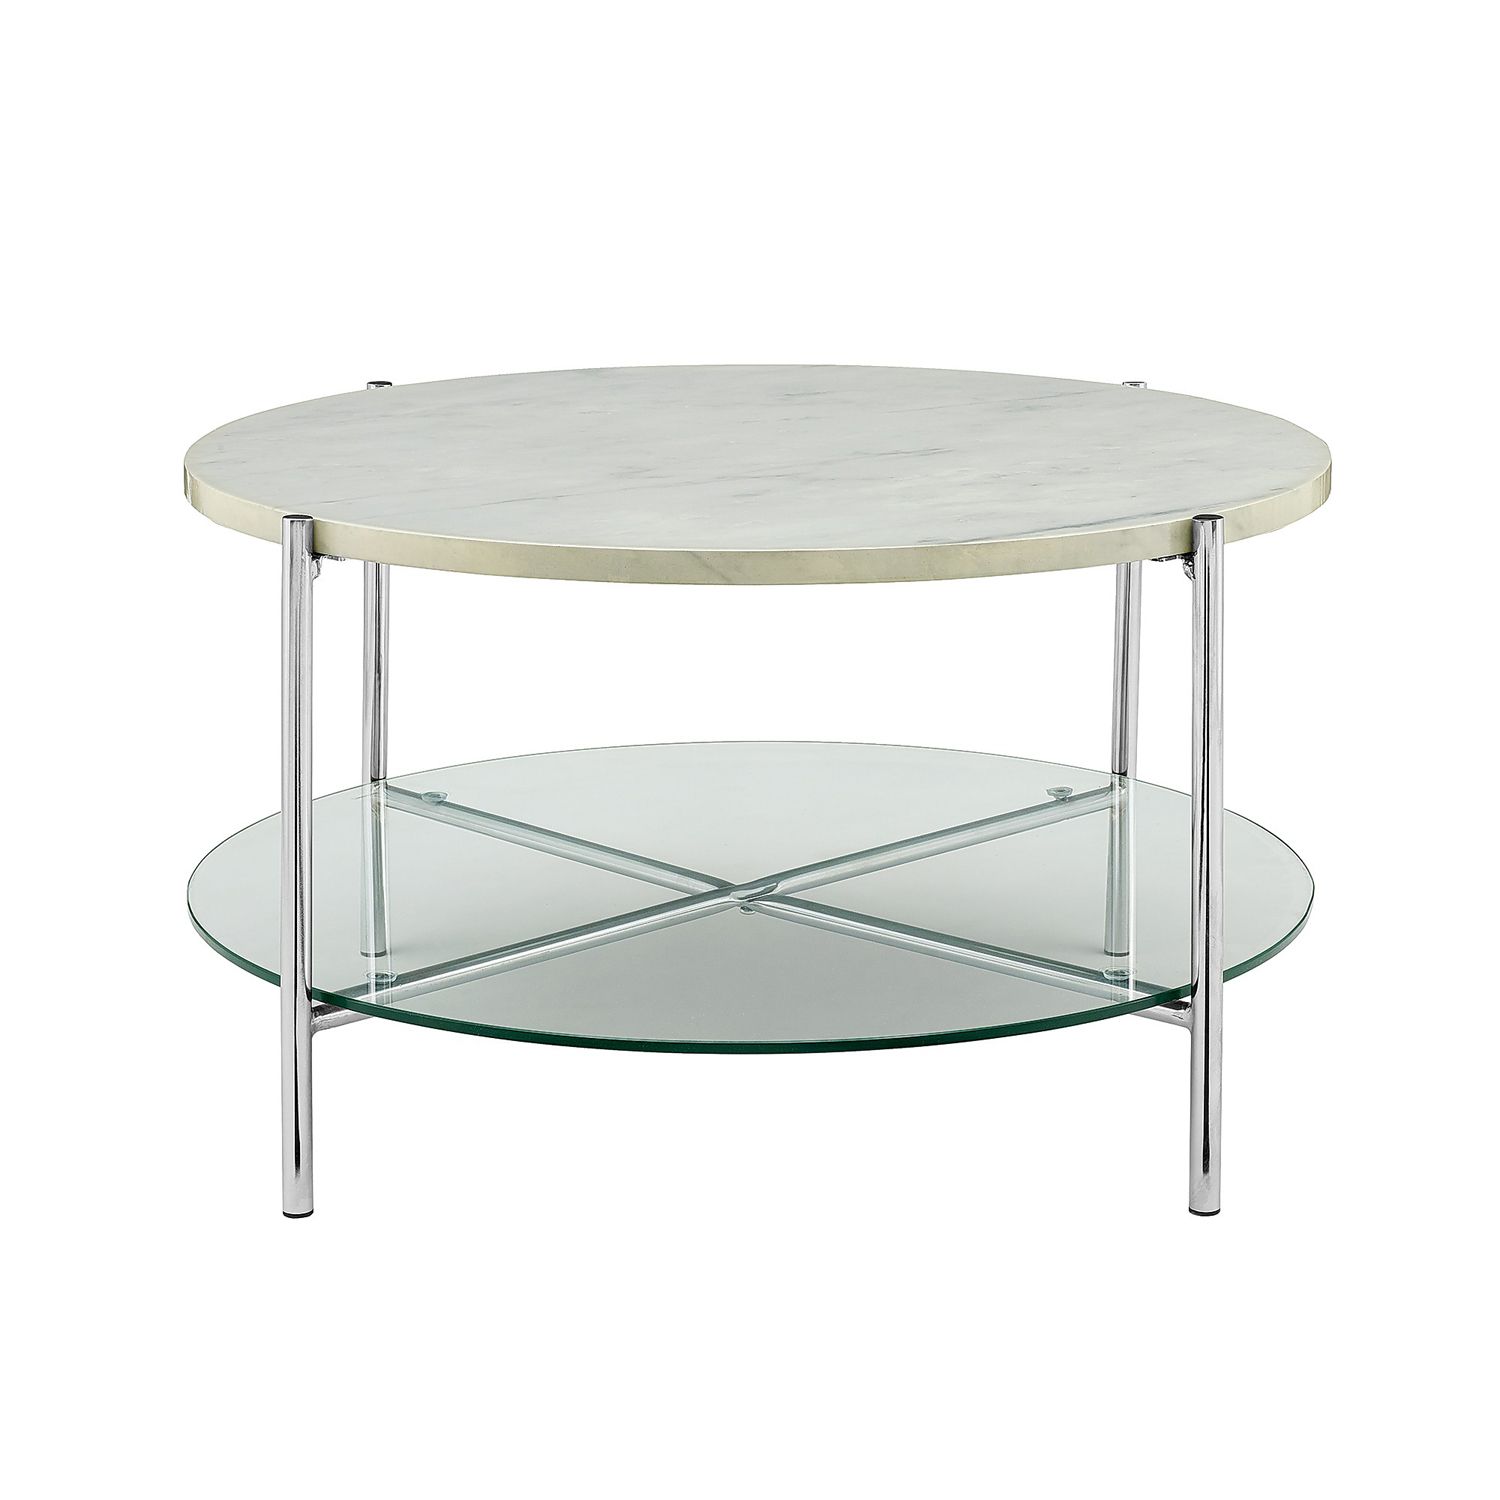 Faux Marble Coffee Tables In Favorite Faux Marble Round Coffee Table – Pier (View 18 of 20)